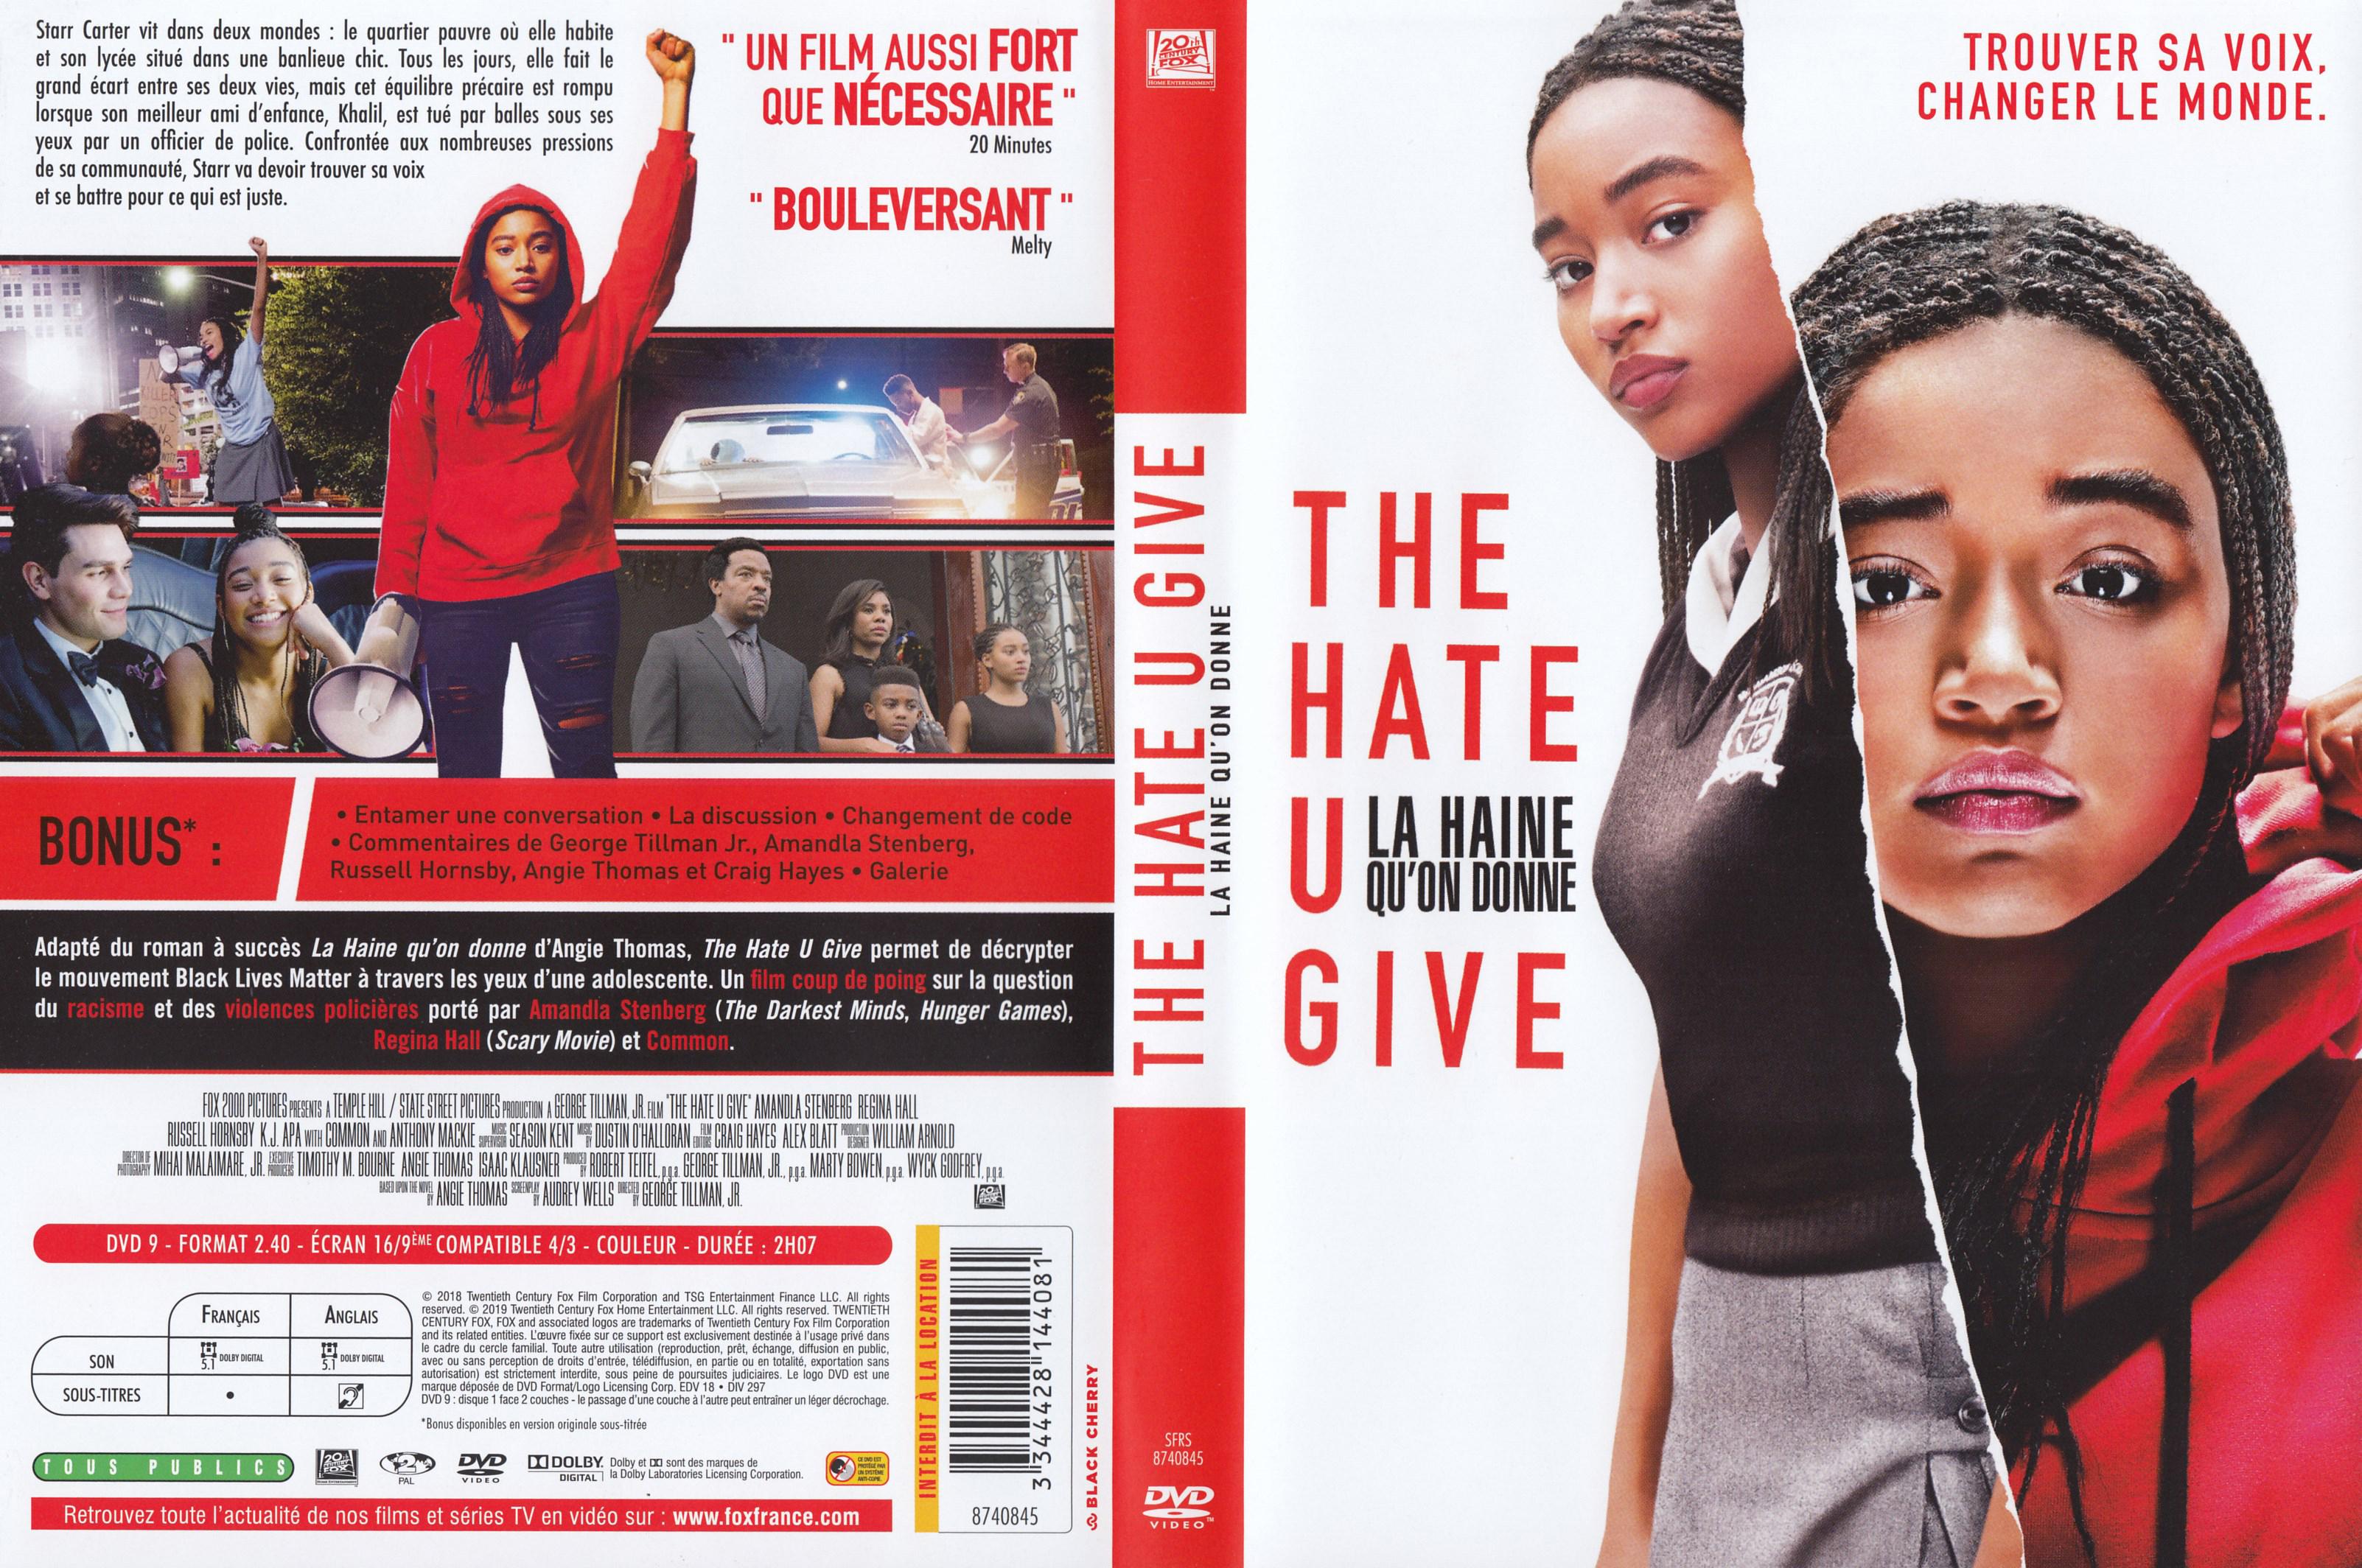 Jaquette DVD The hate u give